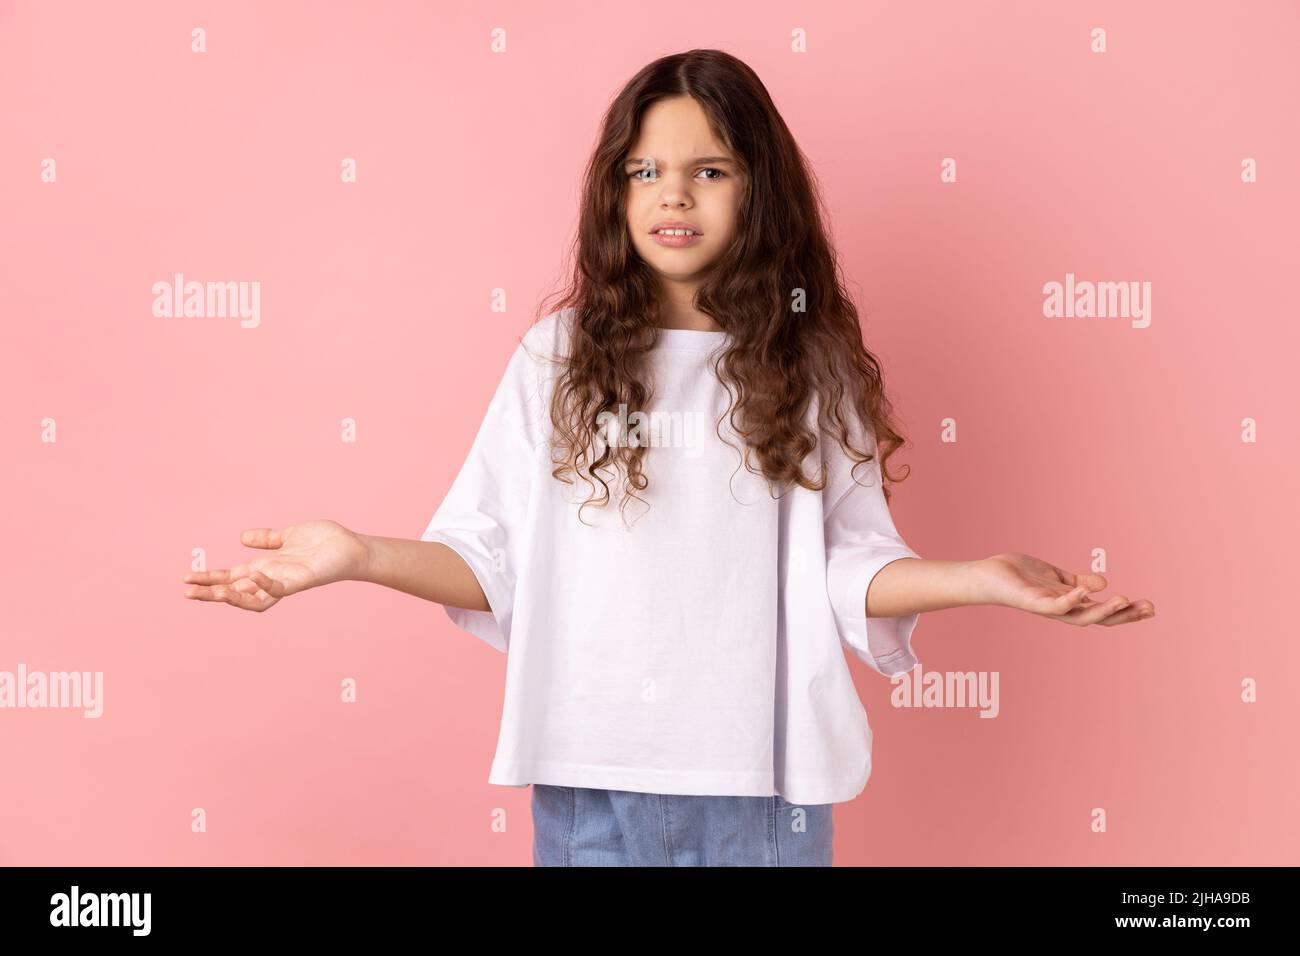 Portrait of annoyed frustrated little girl wearing white T-shirt standing with raised hands and indignant face asking why, annoyed by problem. Indoor studio shot isolated on pink background. Stock Photo